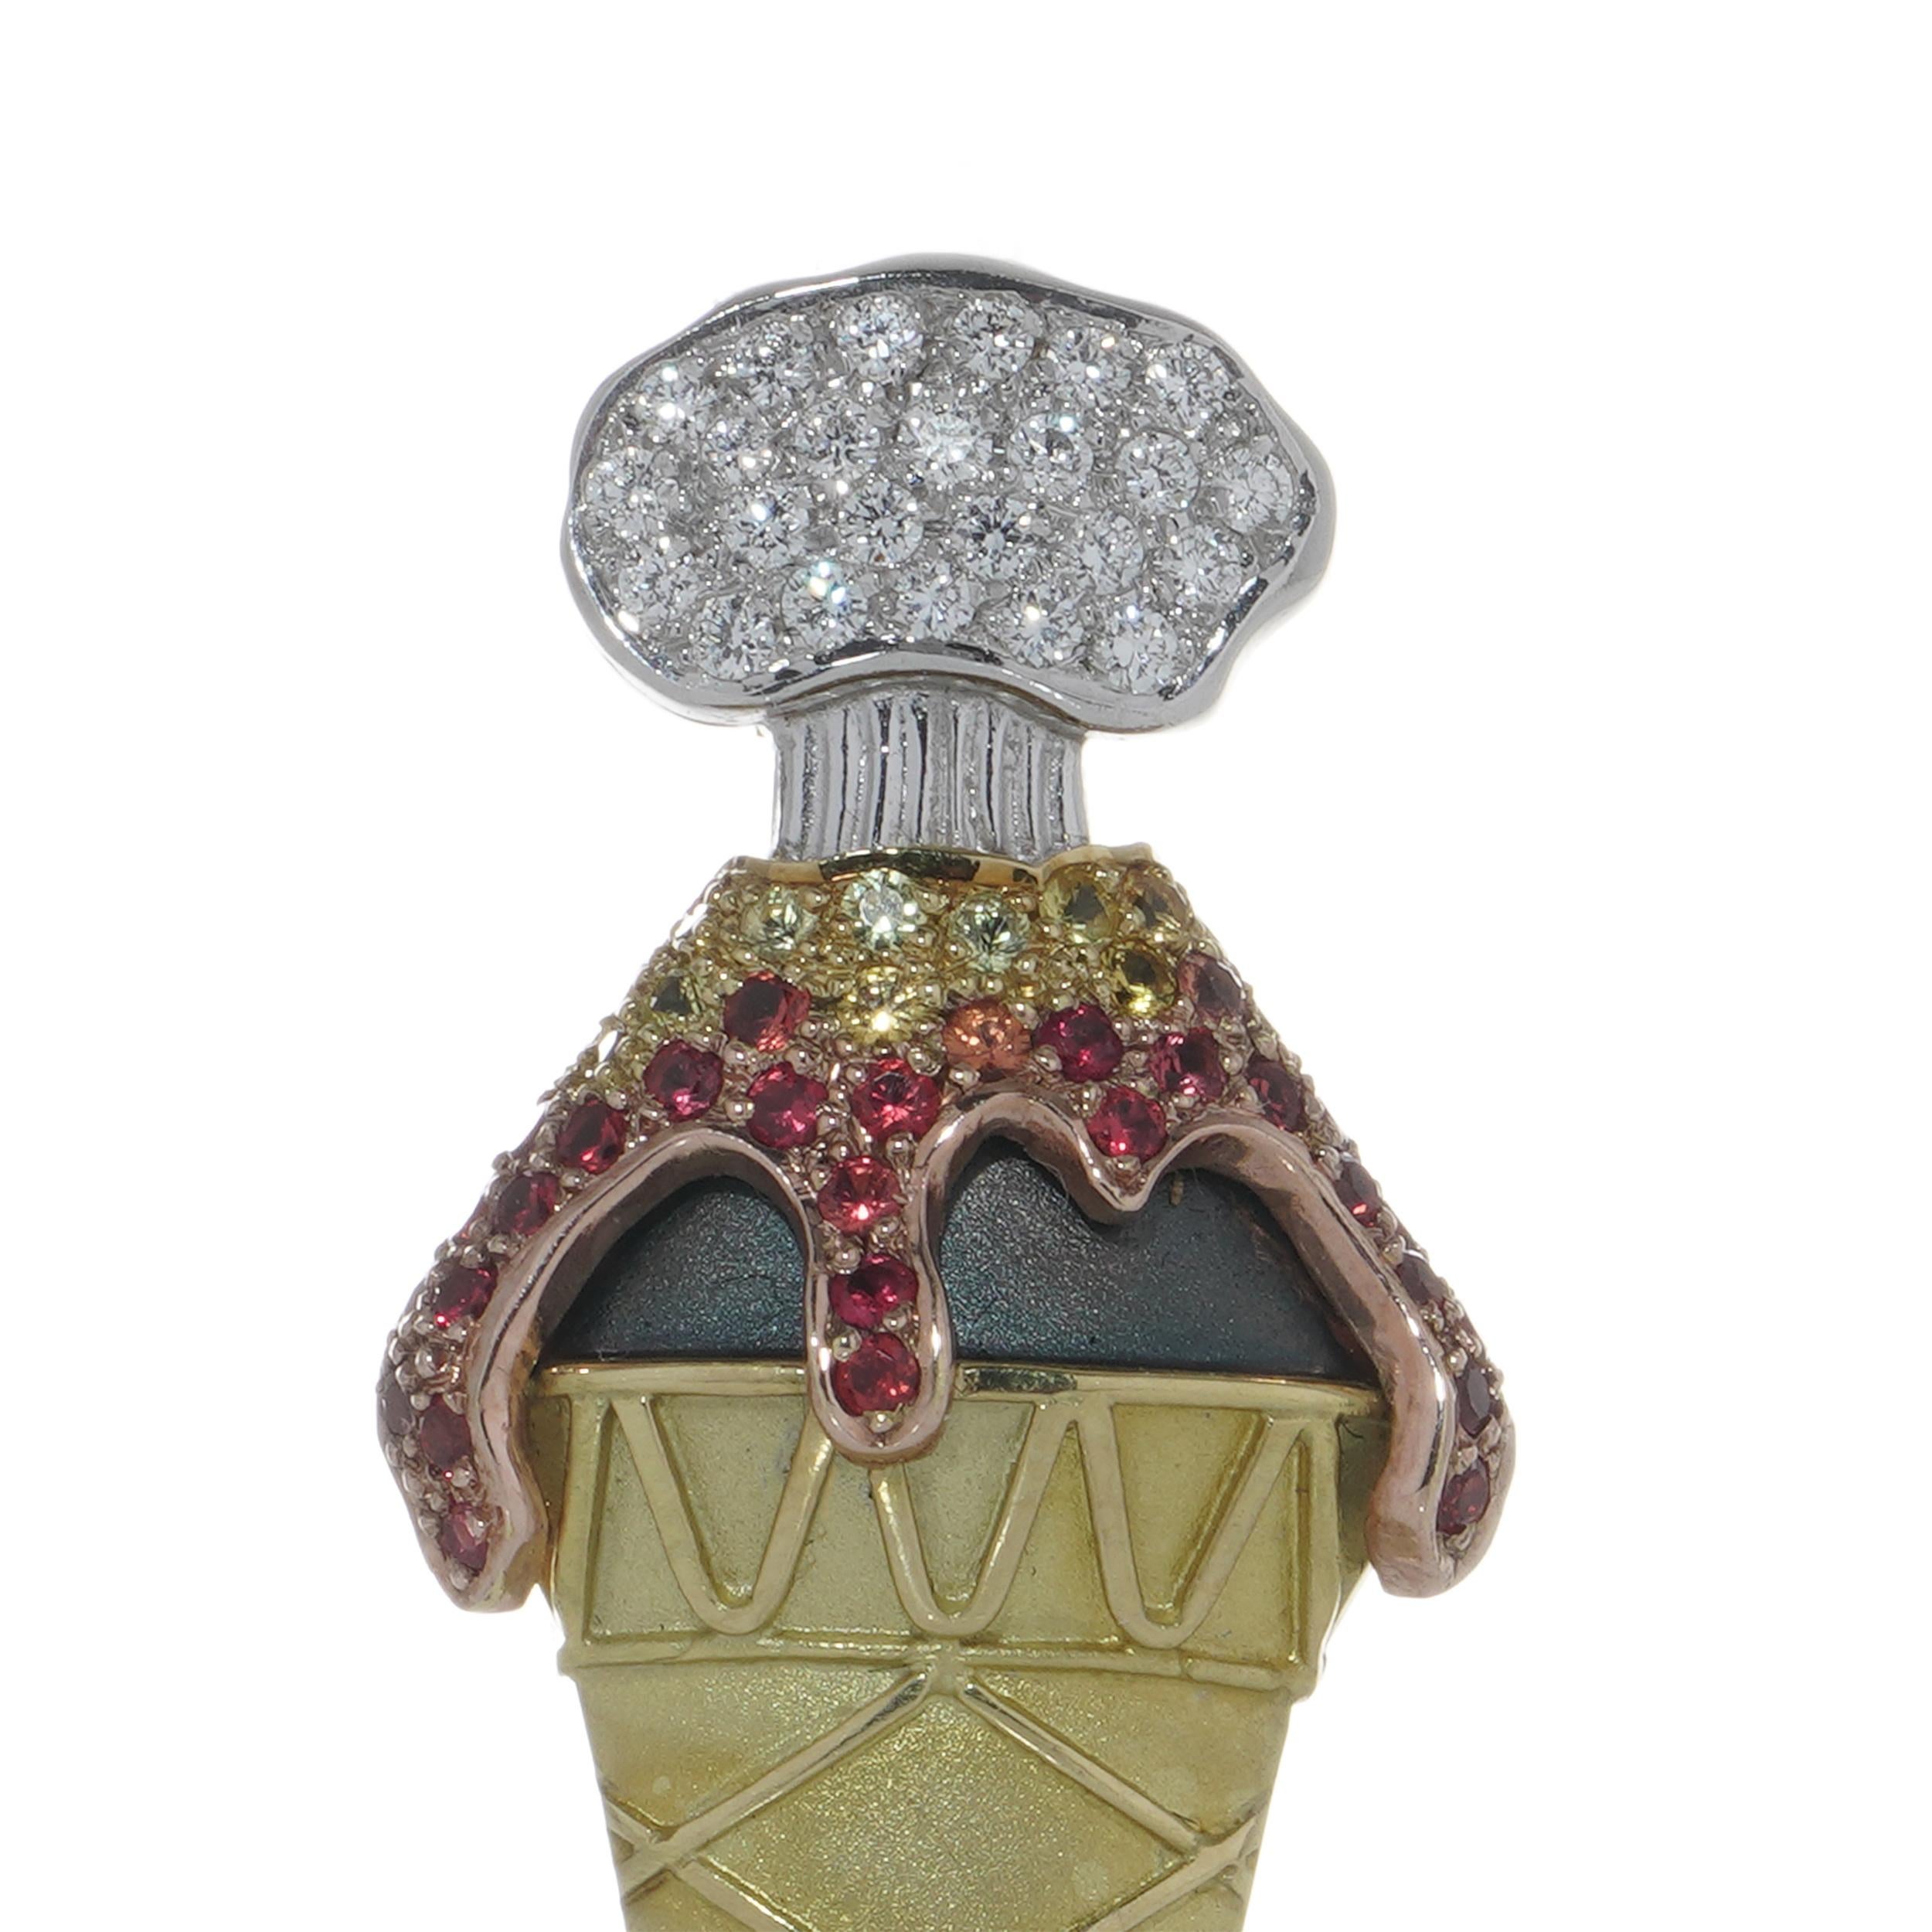 Theo Fennell 18kt gold gelato brooch, as an ice cream cone, pave set brilliant cut diamonds, brilliant cut and fancy coloured sapphires.
Made in London 2019. 
Maker: Theo Fennell.

Dimensions - 
Weight: 10 grams
Size: 4.4 x 1.6 x 0.5 cm

Diamonds